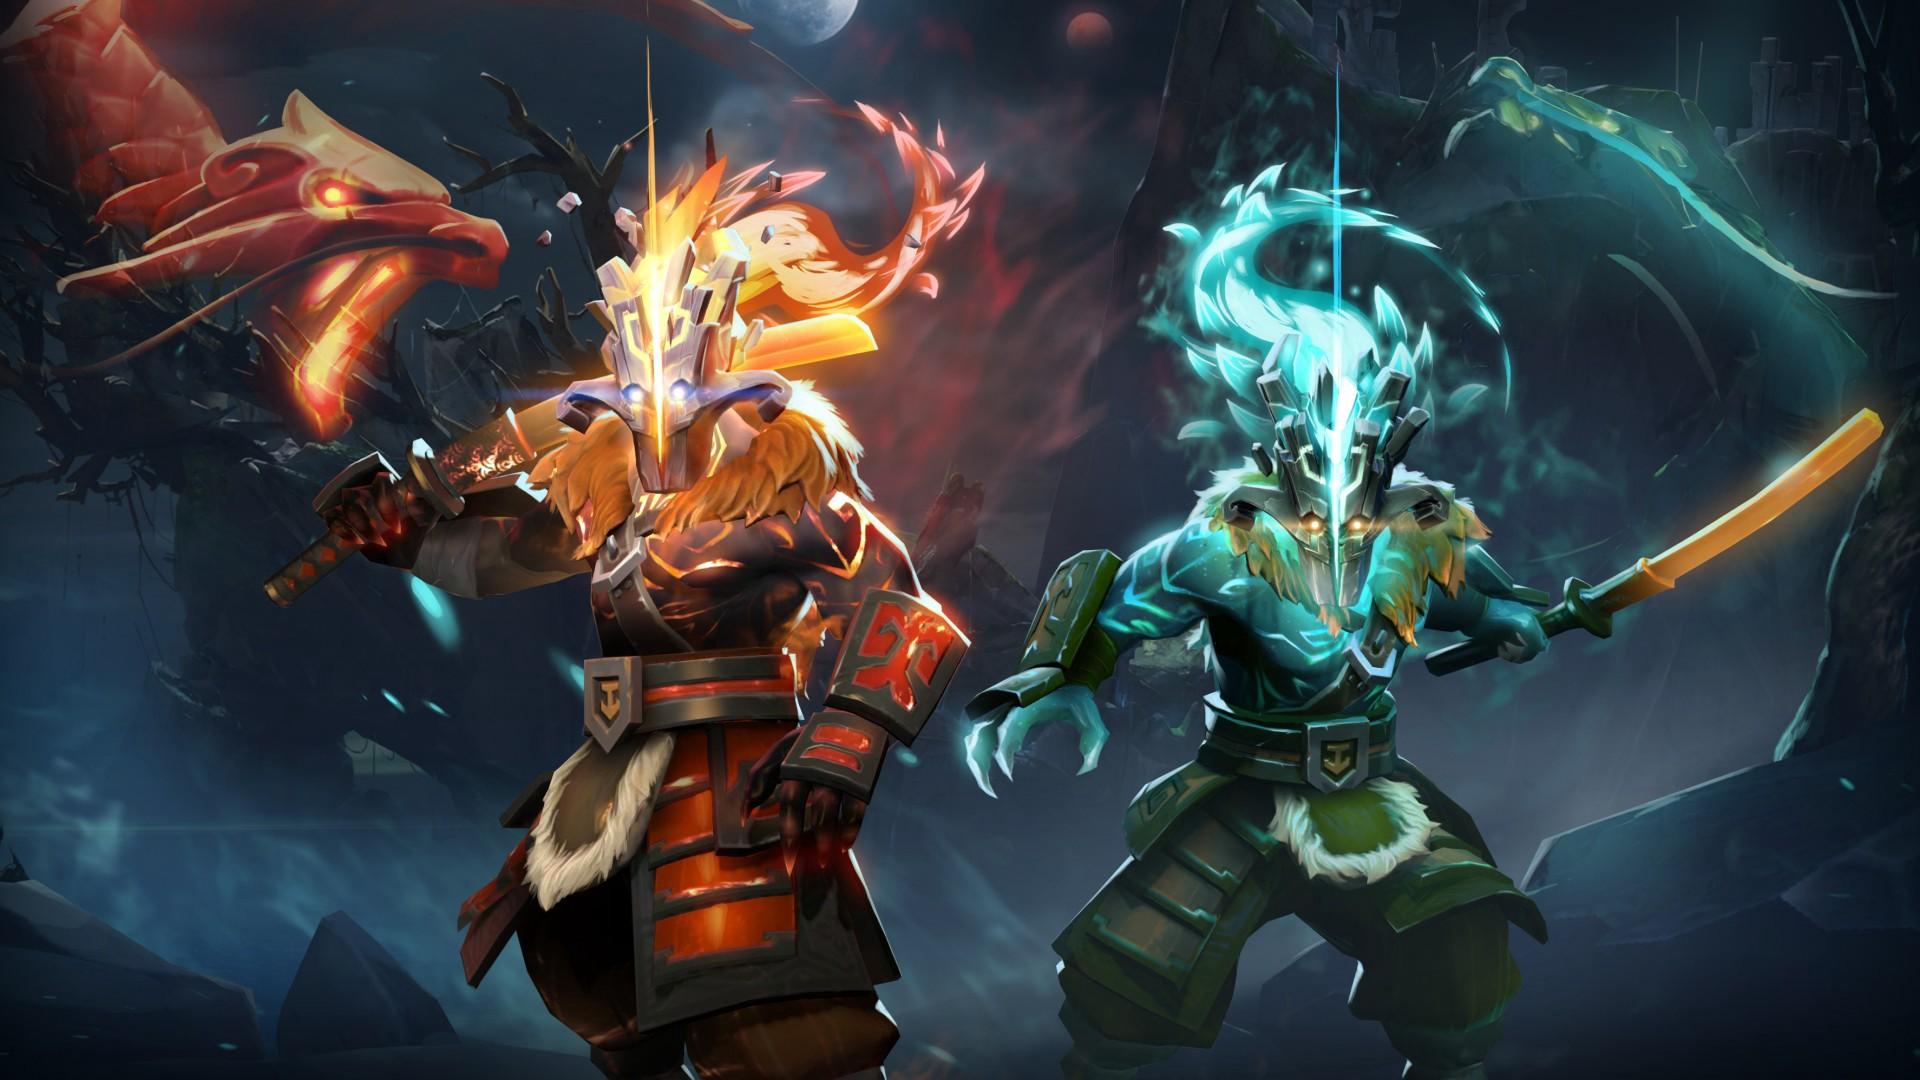 Amazing Dota 2 HD Wallpaper. Gaming Background for PC